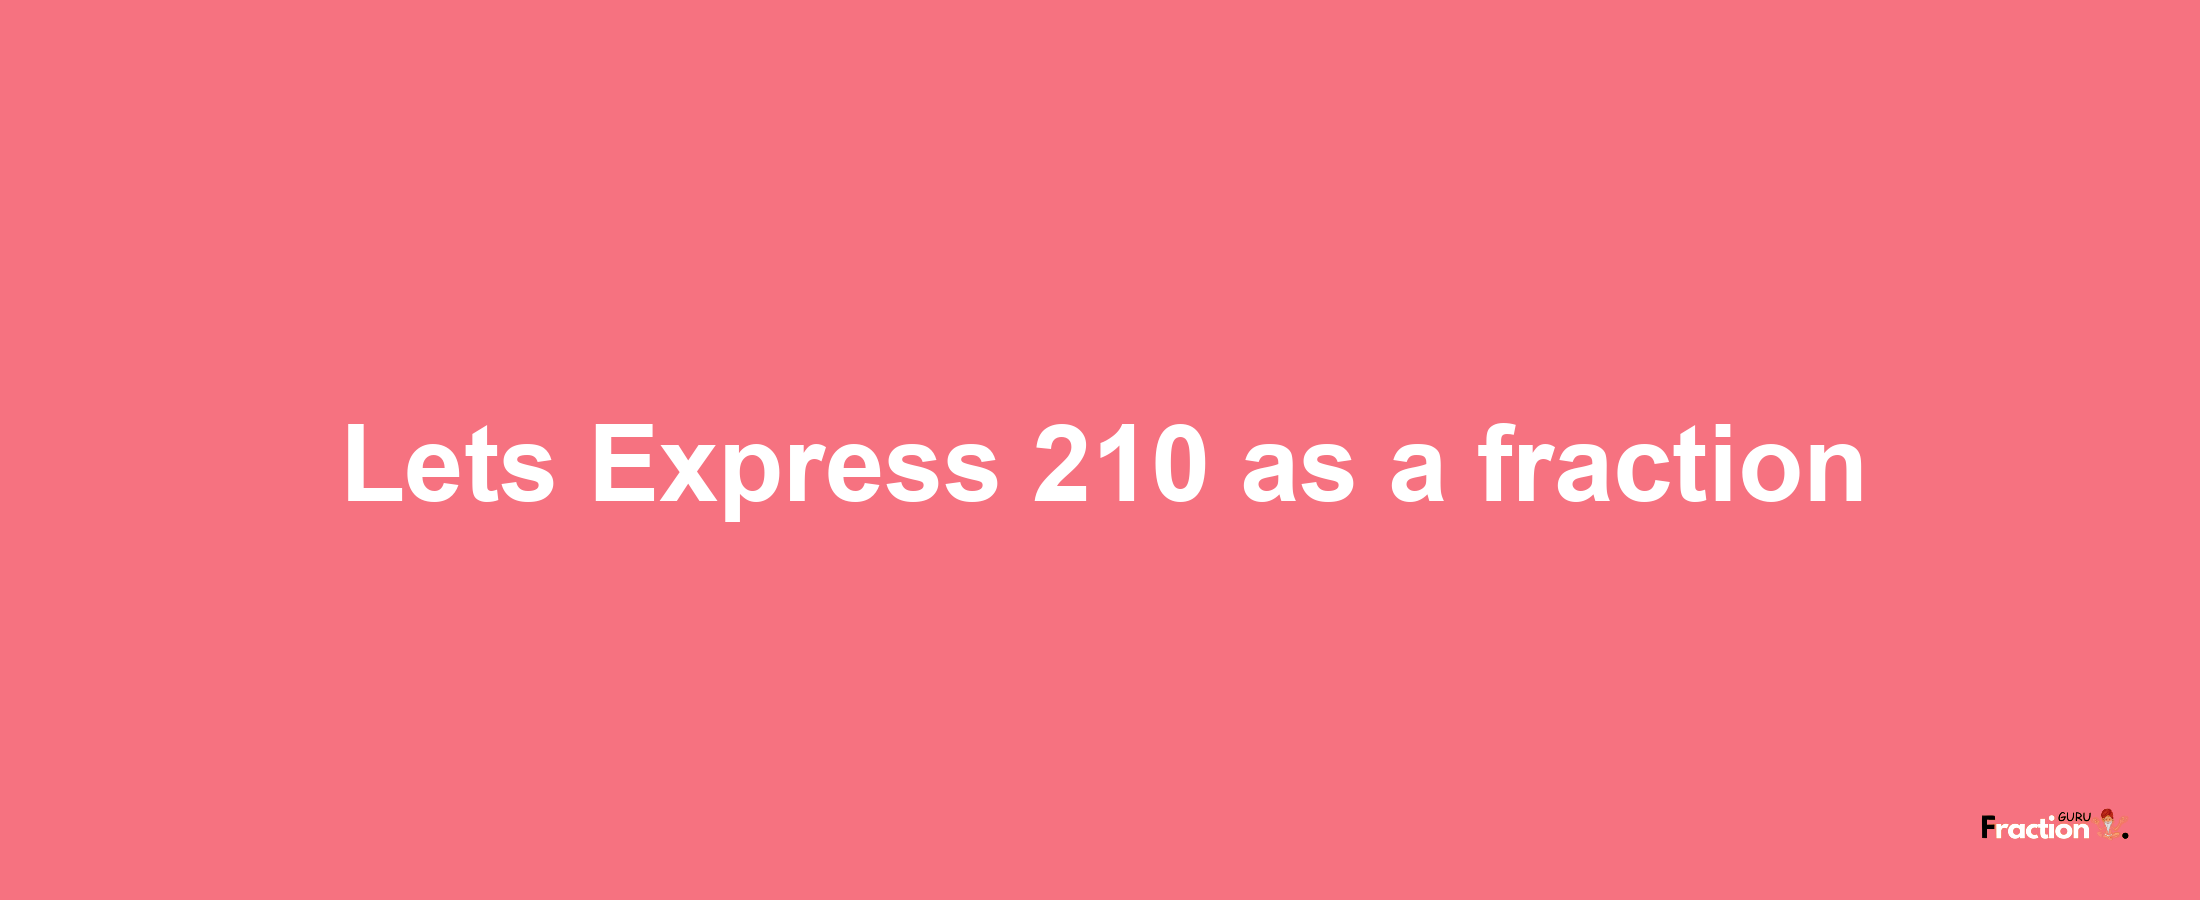 Lets Express 210 as afraction